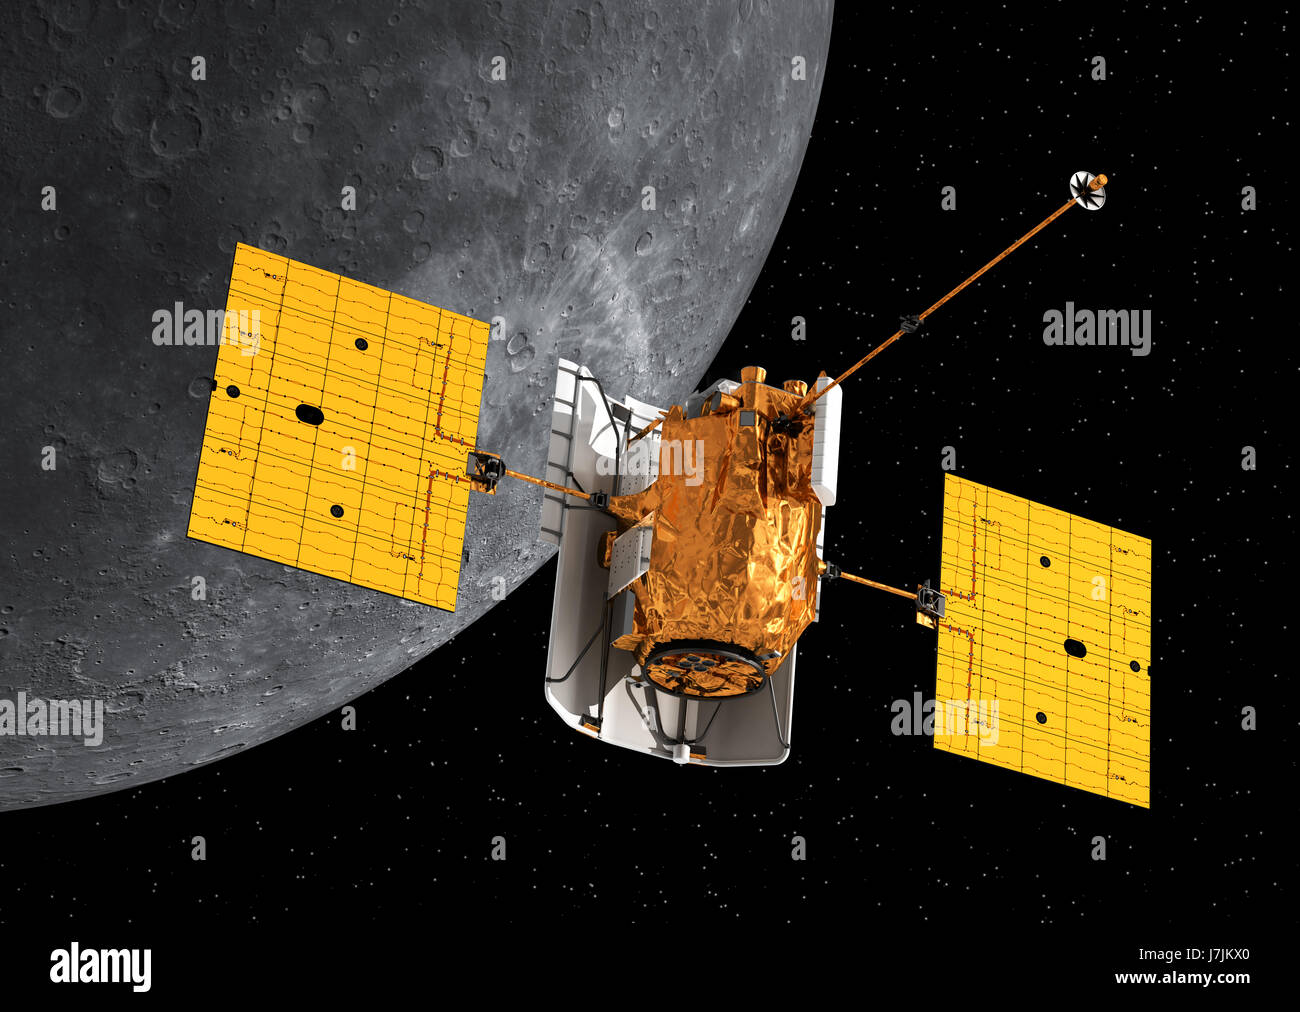 Interplanetary Space Station Orbiting Mercury. 3D Illustration. Elements of this image furnished by NASA. Stock Photo